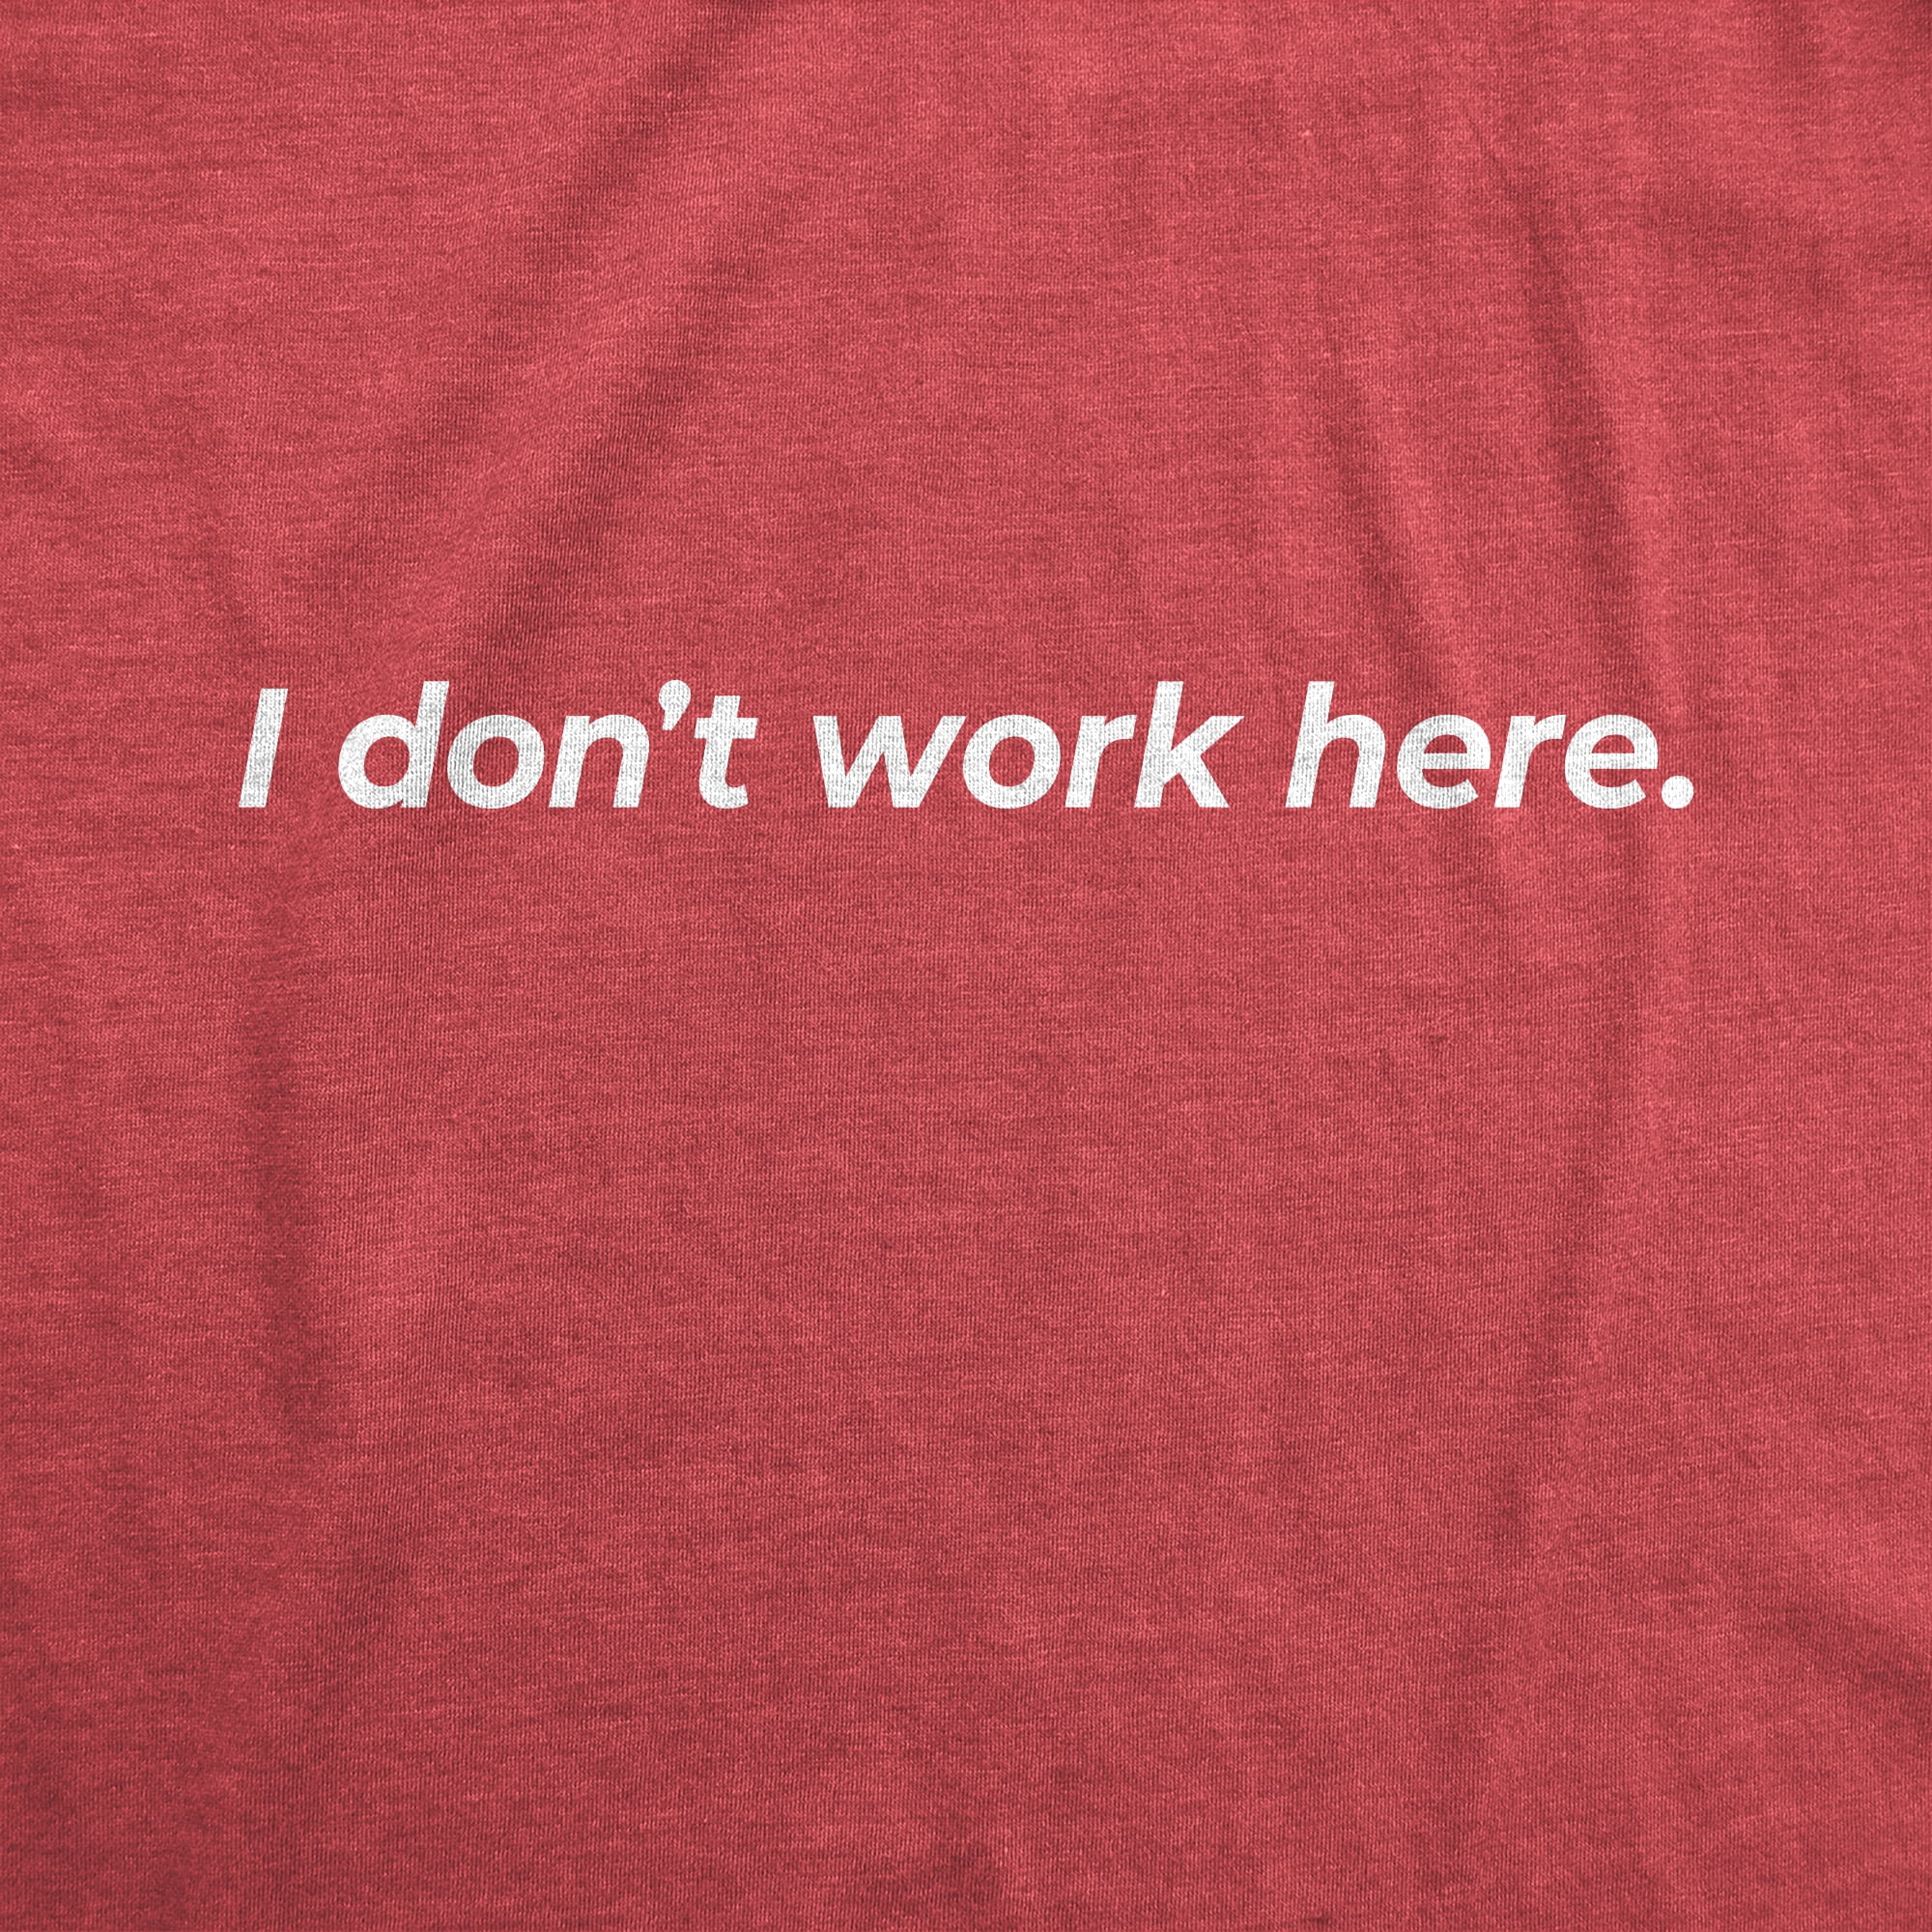 I Dont Here T shirt Funny Sarcastic Employee Gift Hilarious Saying Red) - L Graphic Tees - Walmart.com